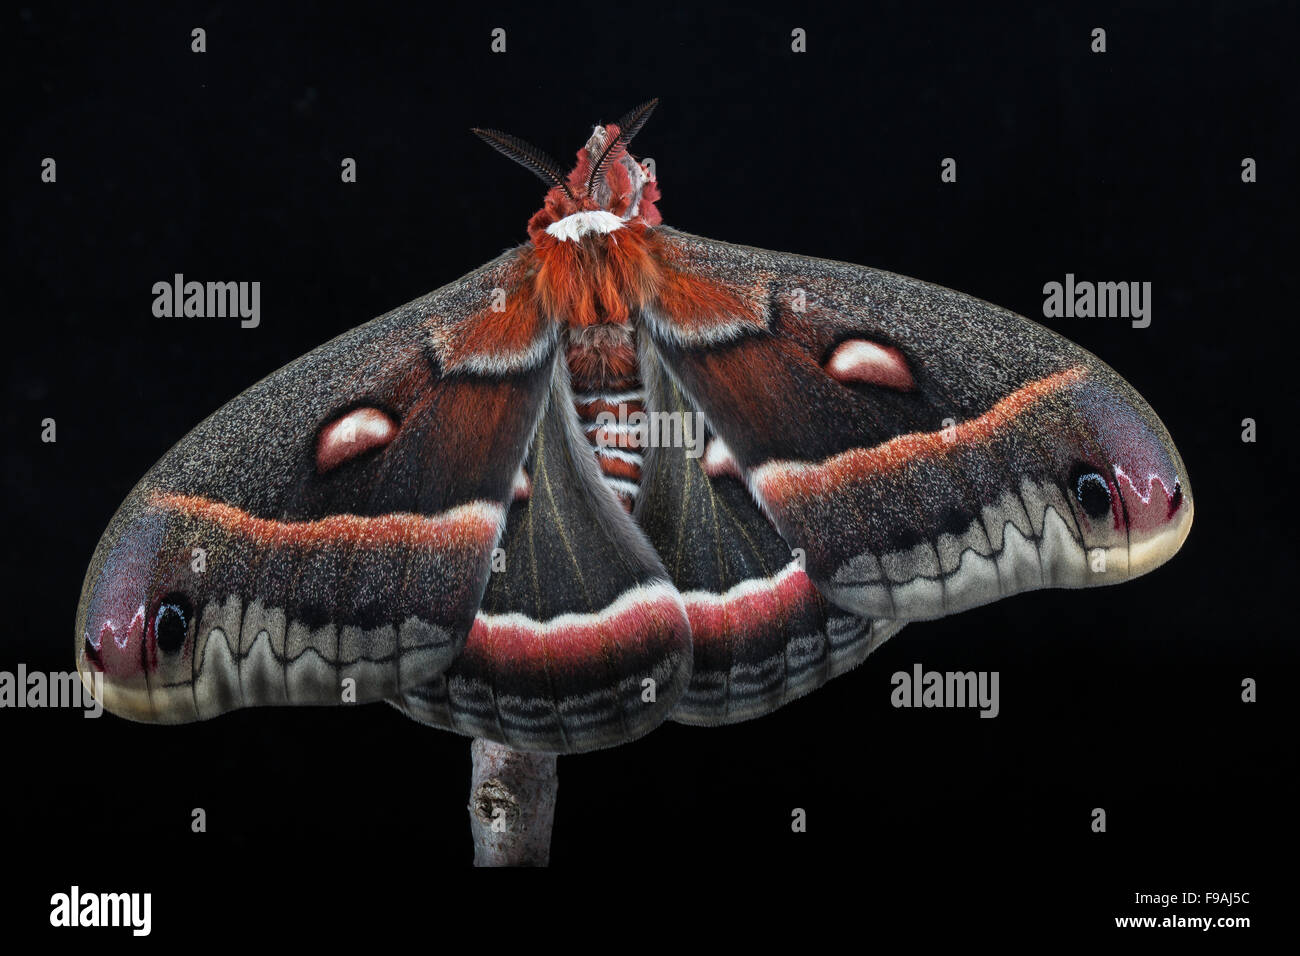 A freshly emerged Cecropia silkmoth, Hyalophora cecropia, on a black background Stock Photo